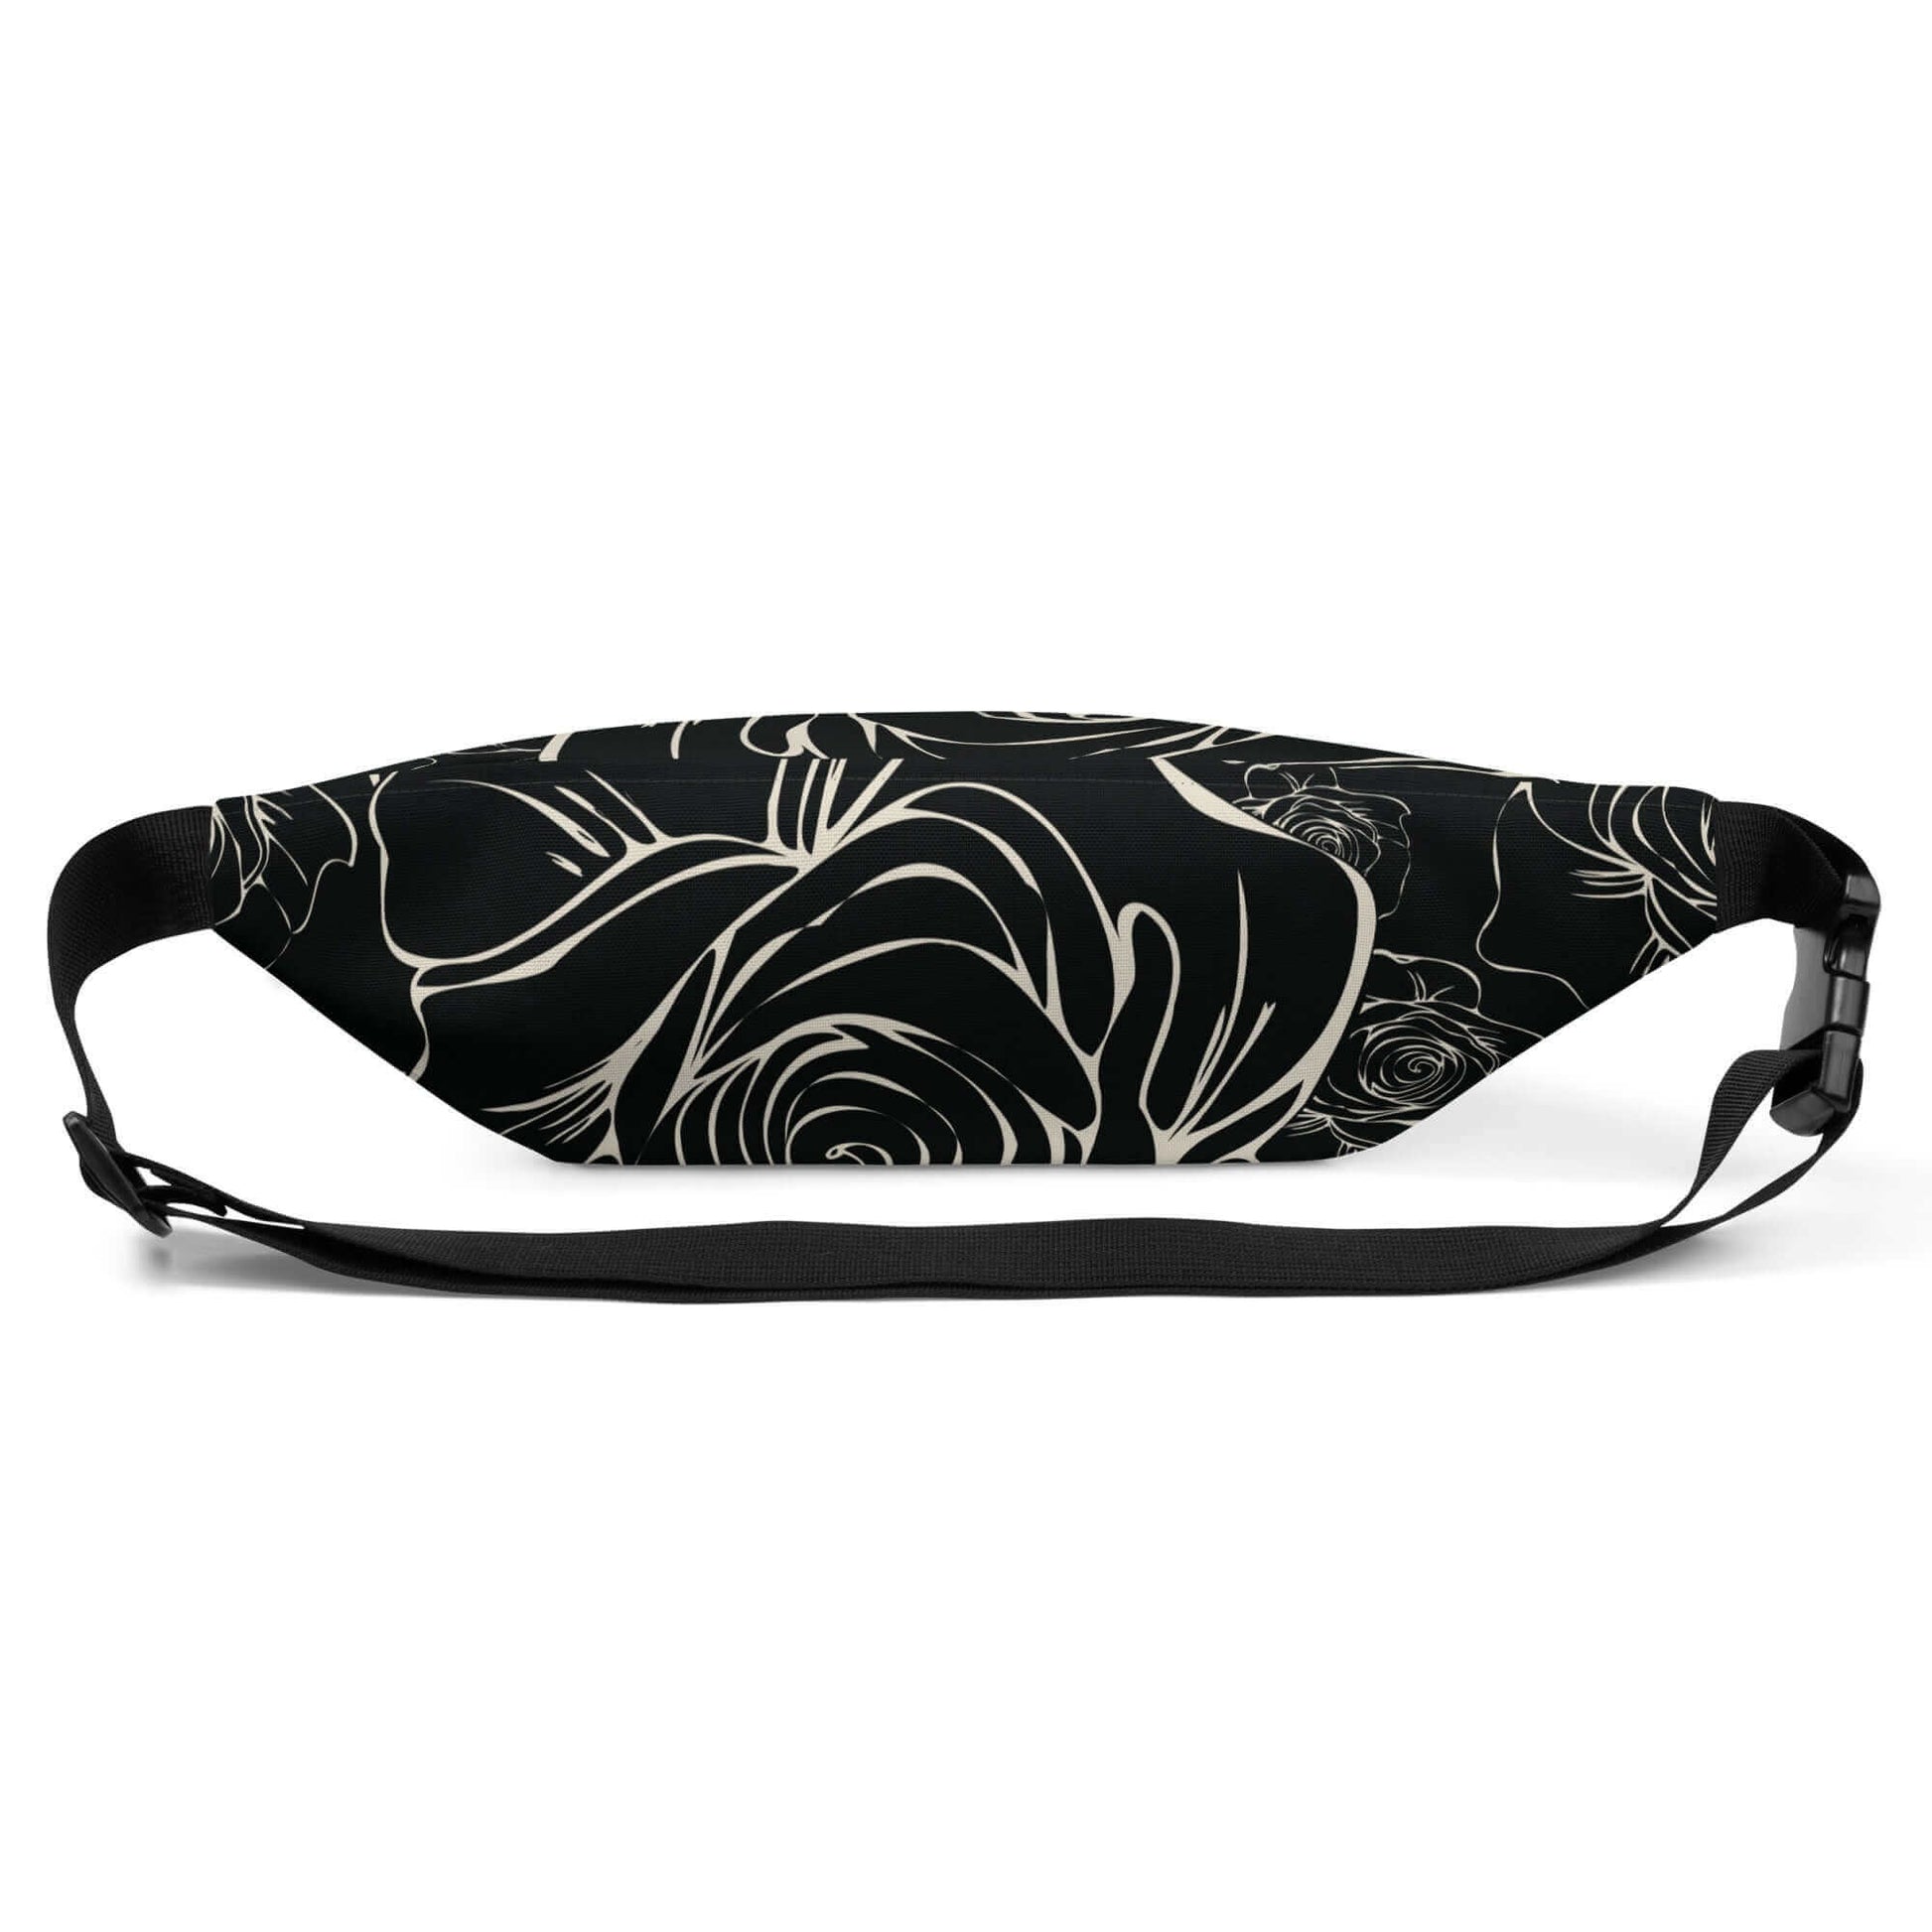 Gallica Fanny Pack, Black back view